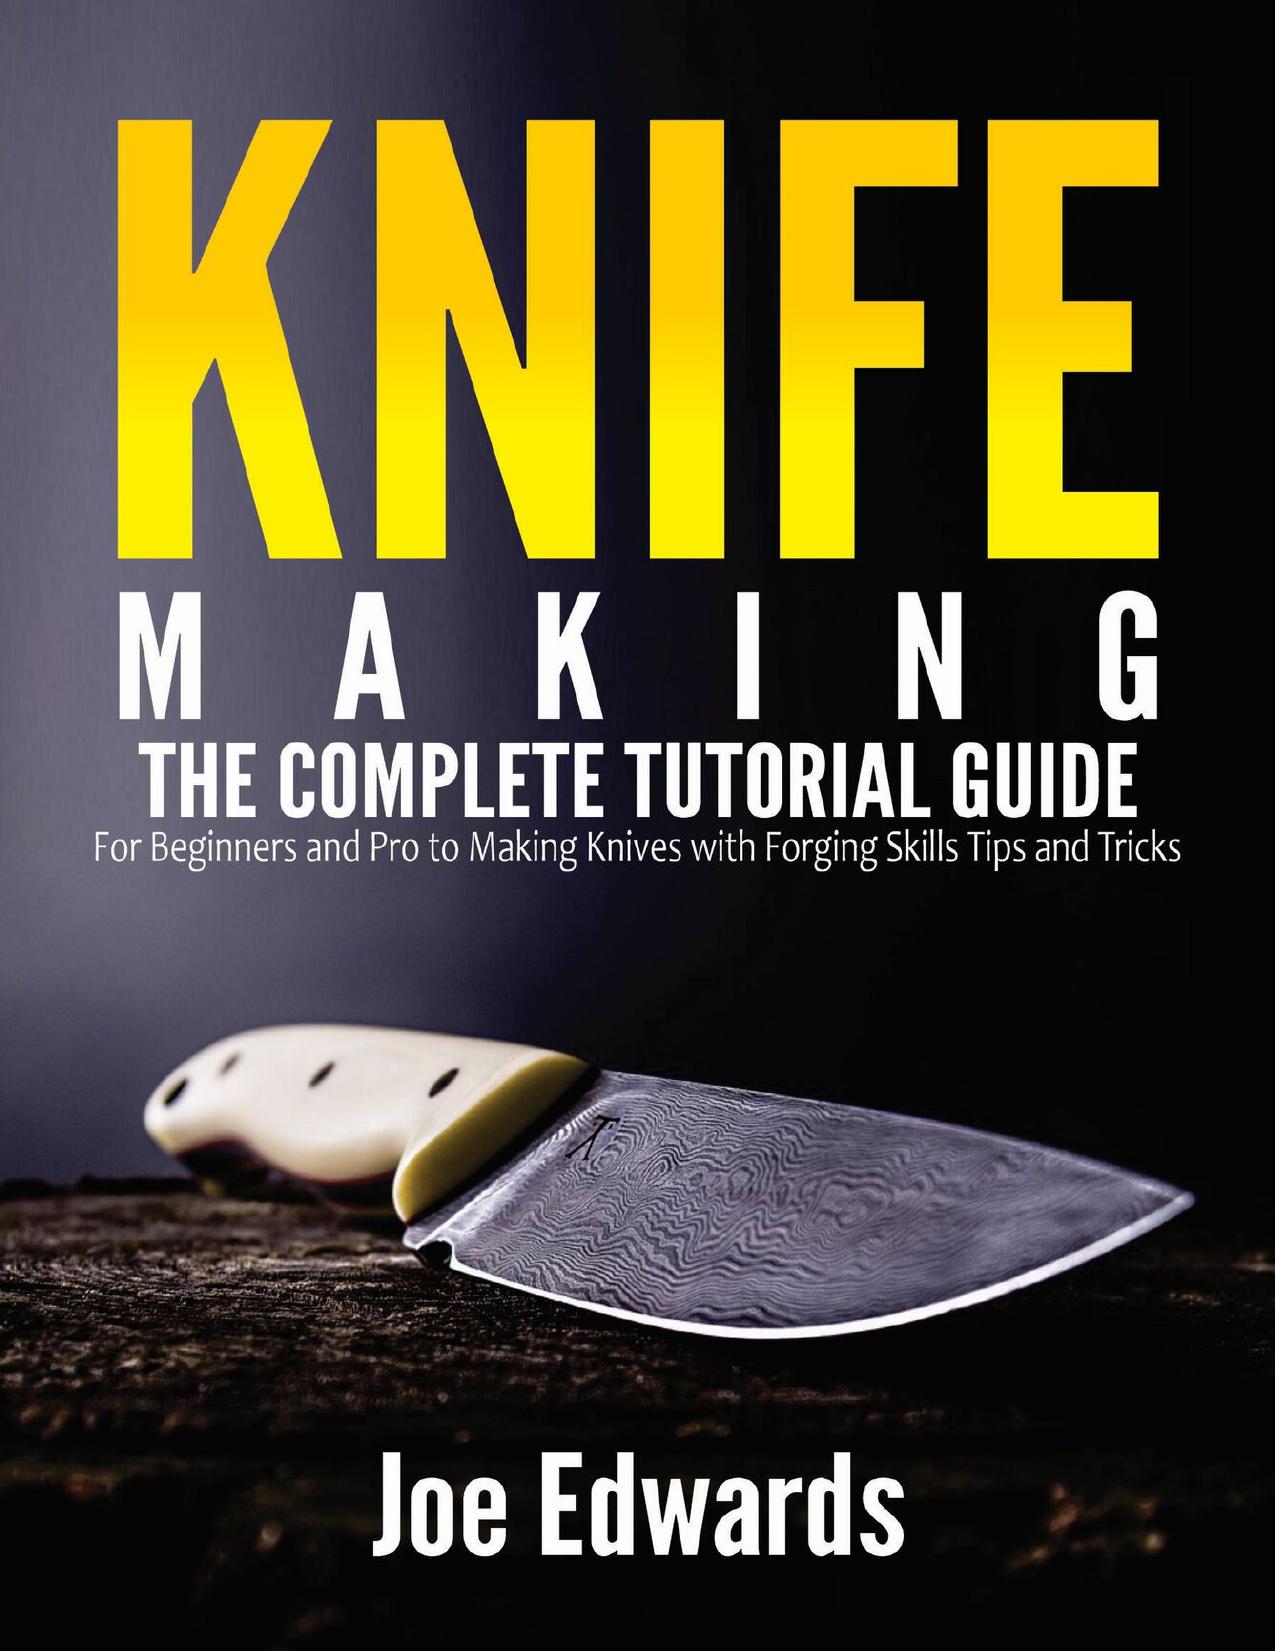 Knife Making: The Complete Tutorial Guide for Beginners and Pro to Making Knives with Forging Skills Tips and Tricks by Edwards Joe